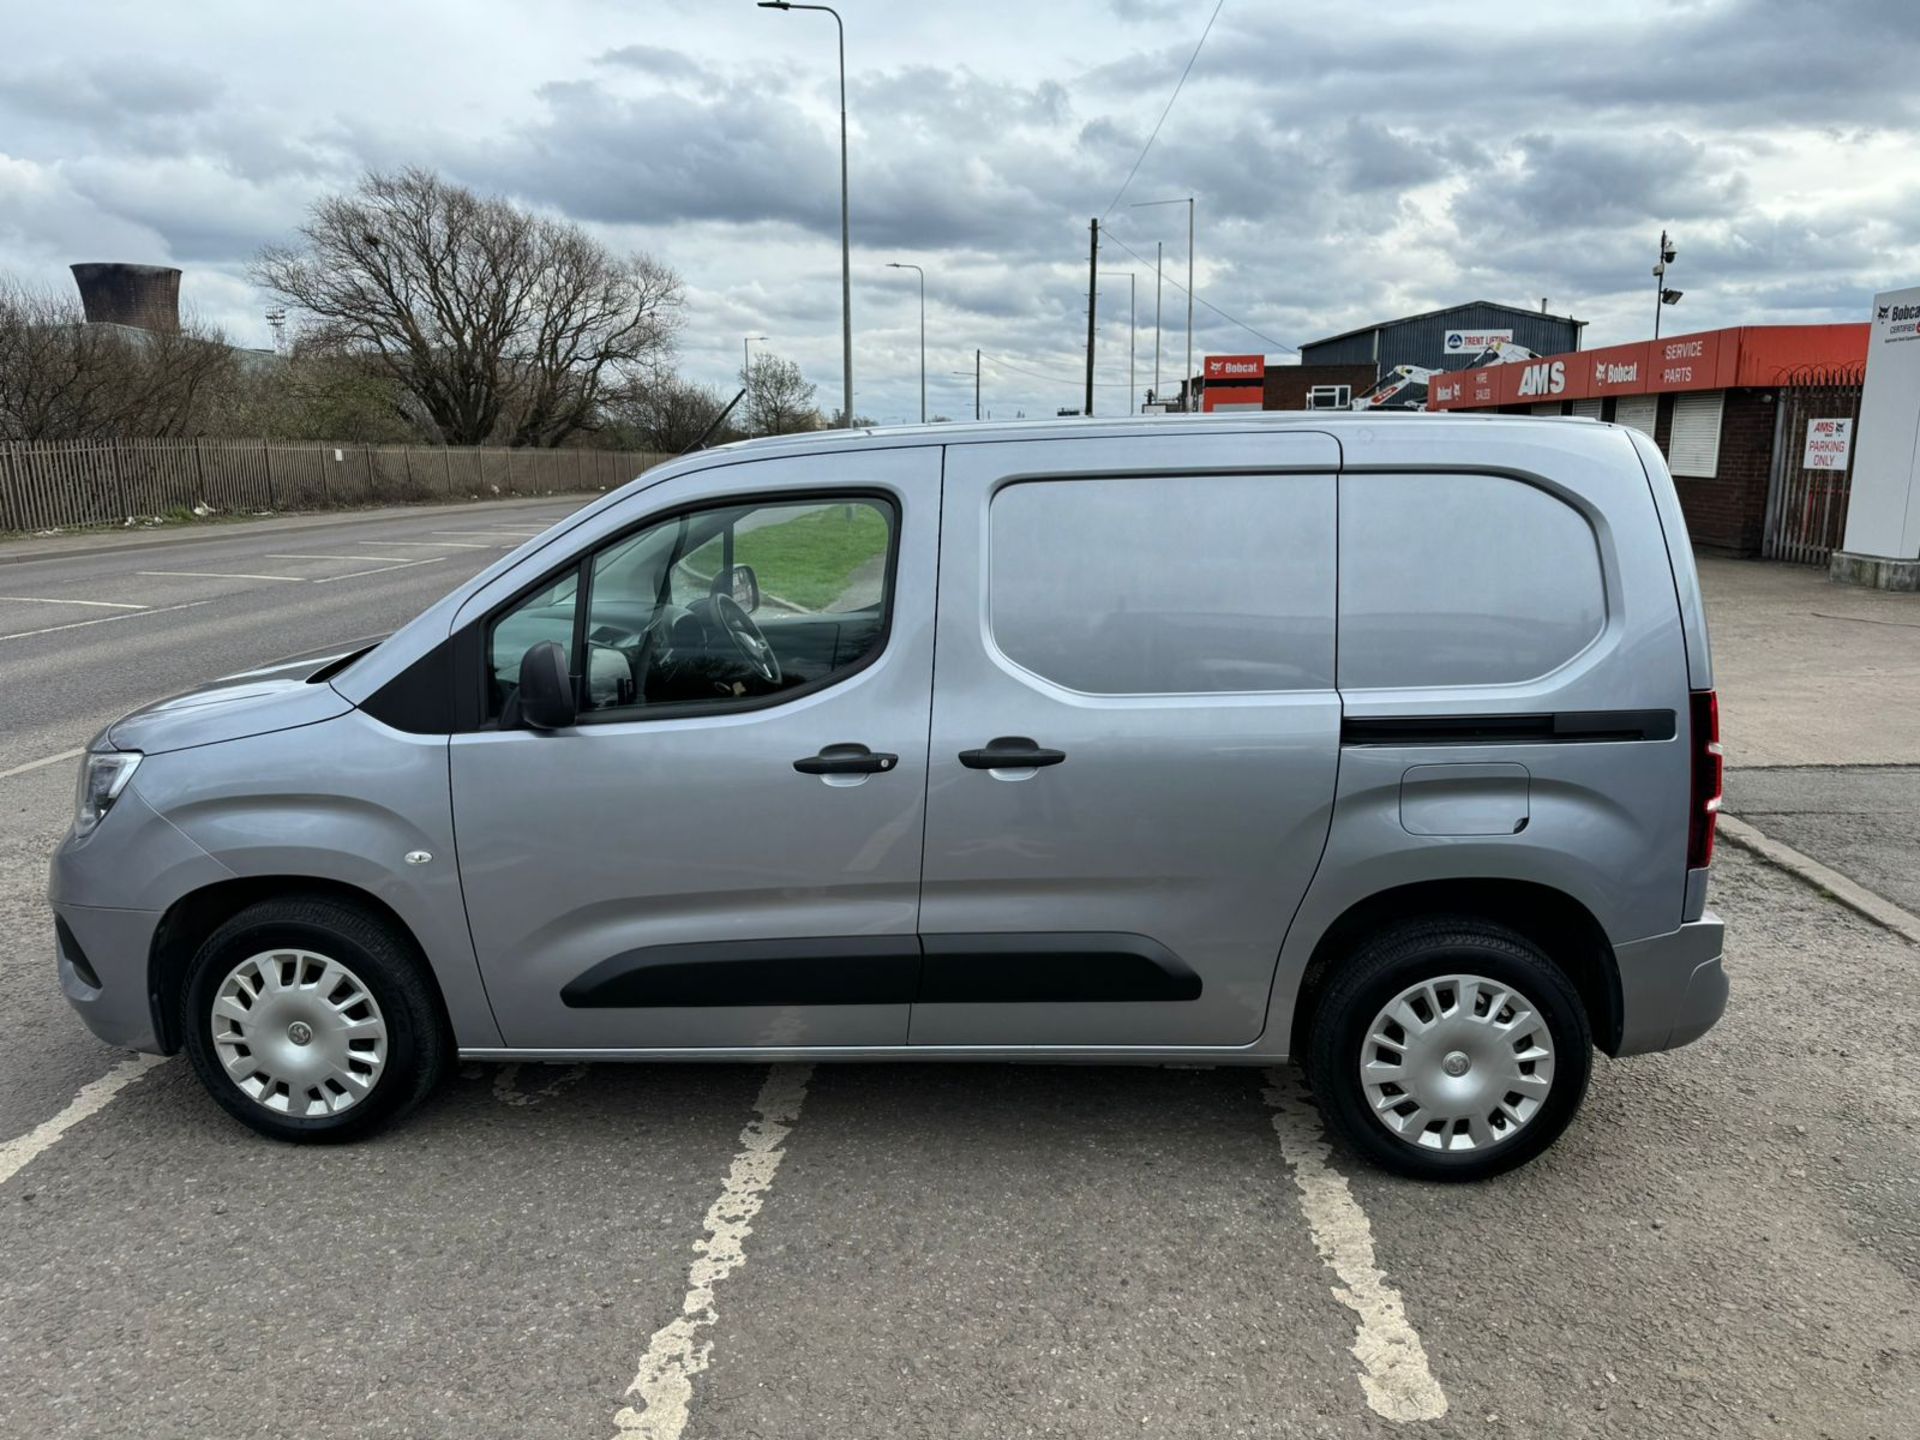 2020 20 VAUXHALL COMBO SPORTIVE PANEL VAN - 51K MILES - PLY LINED - AIR CON. - Image 5 of 11